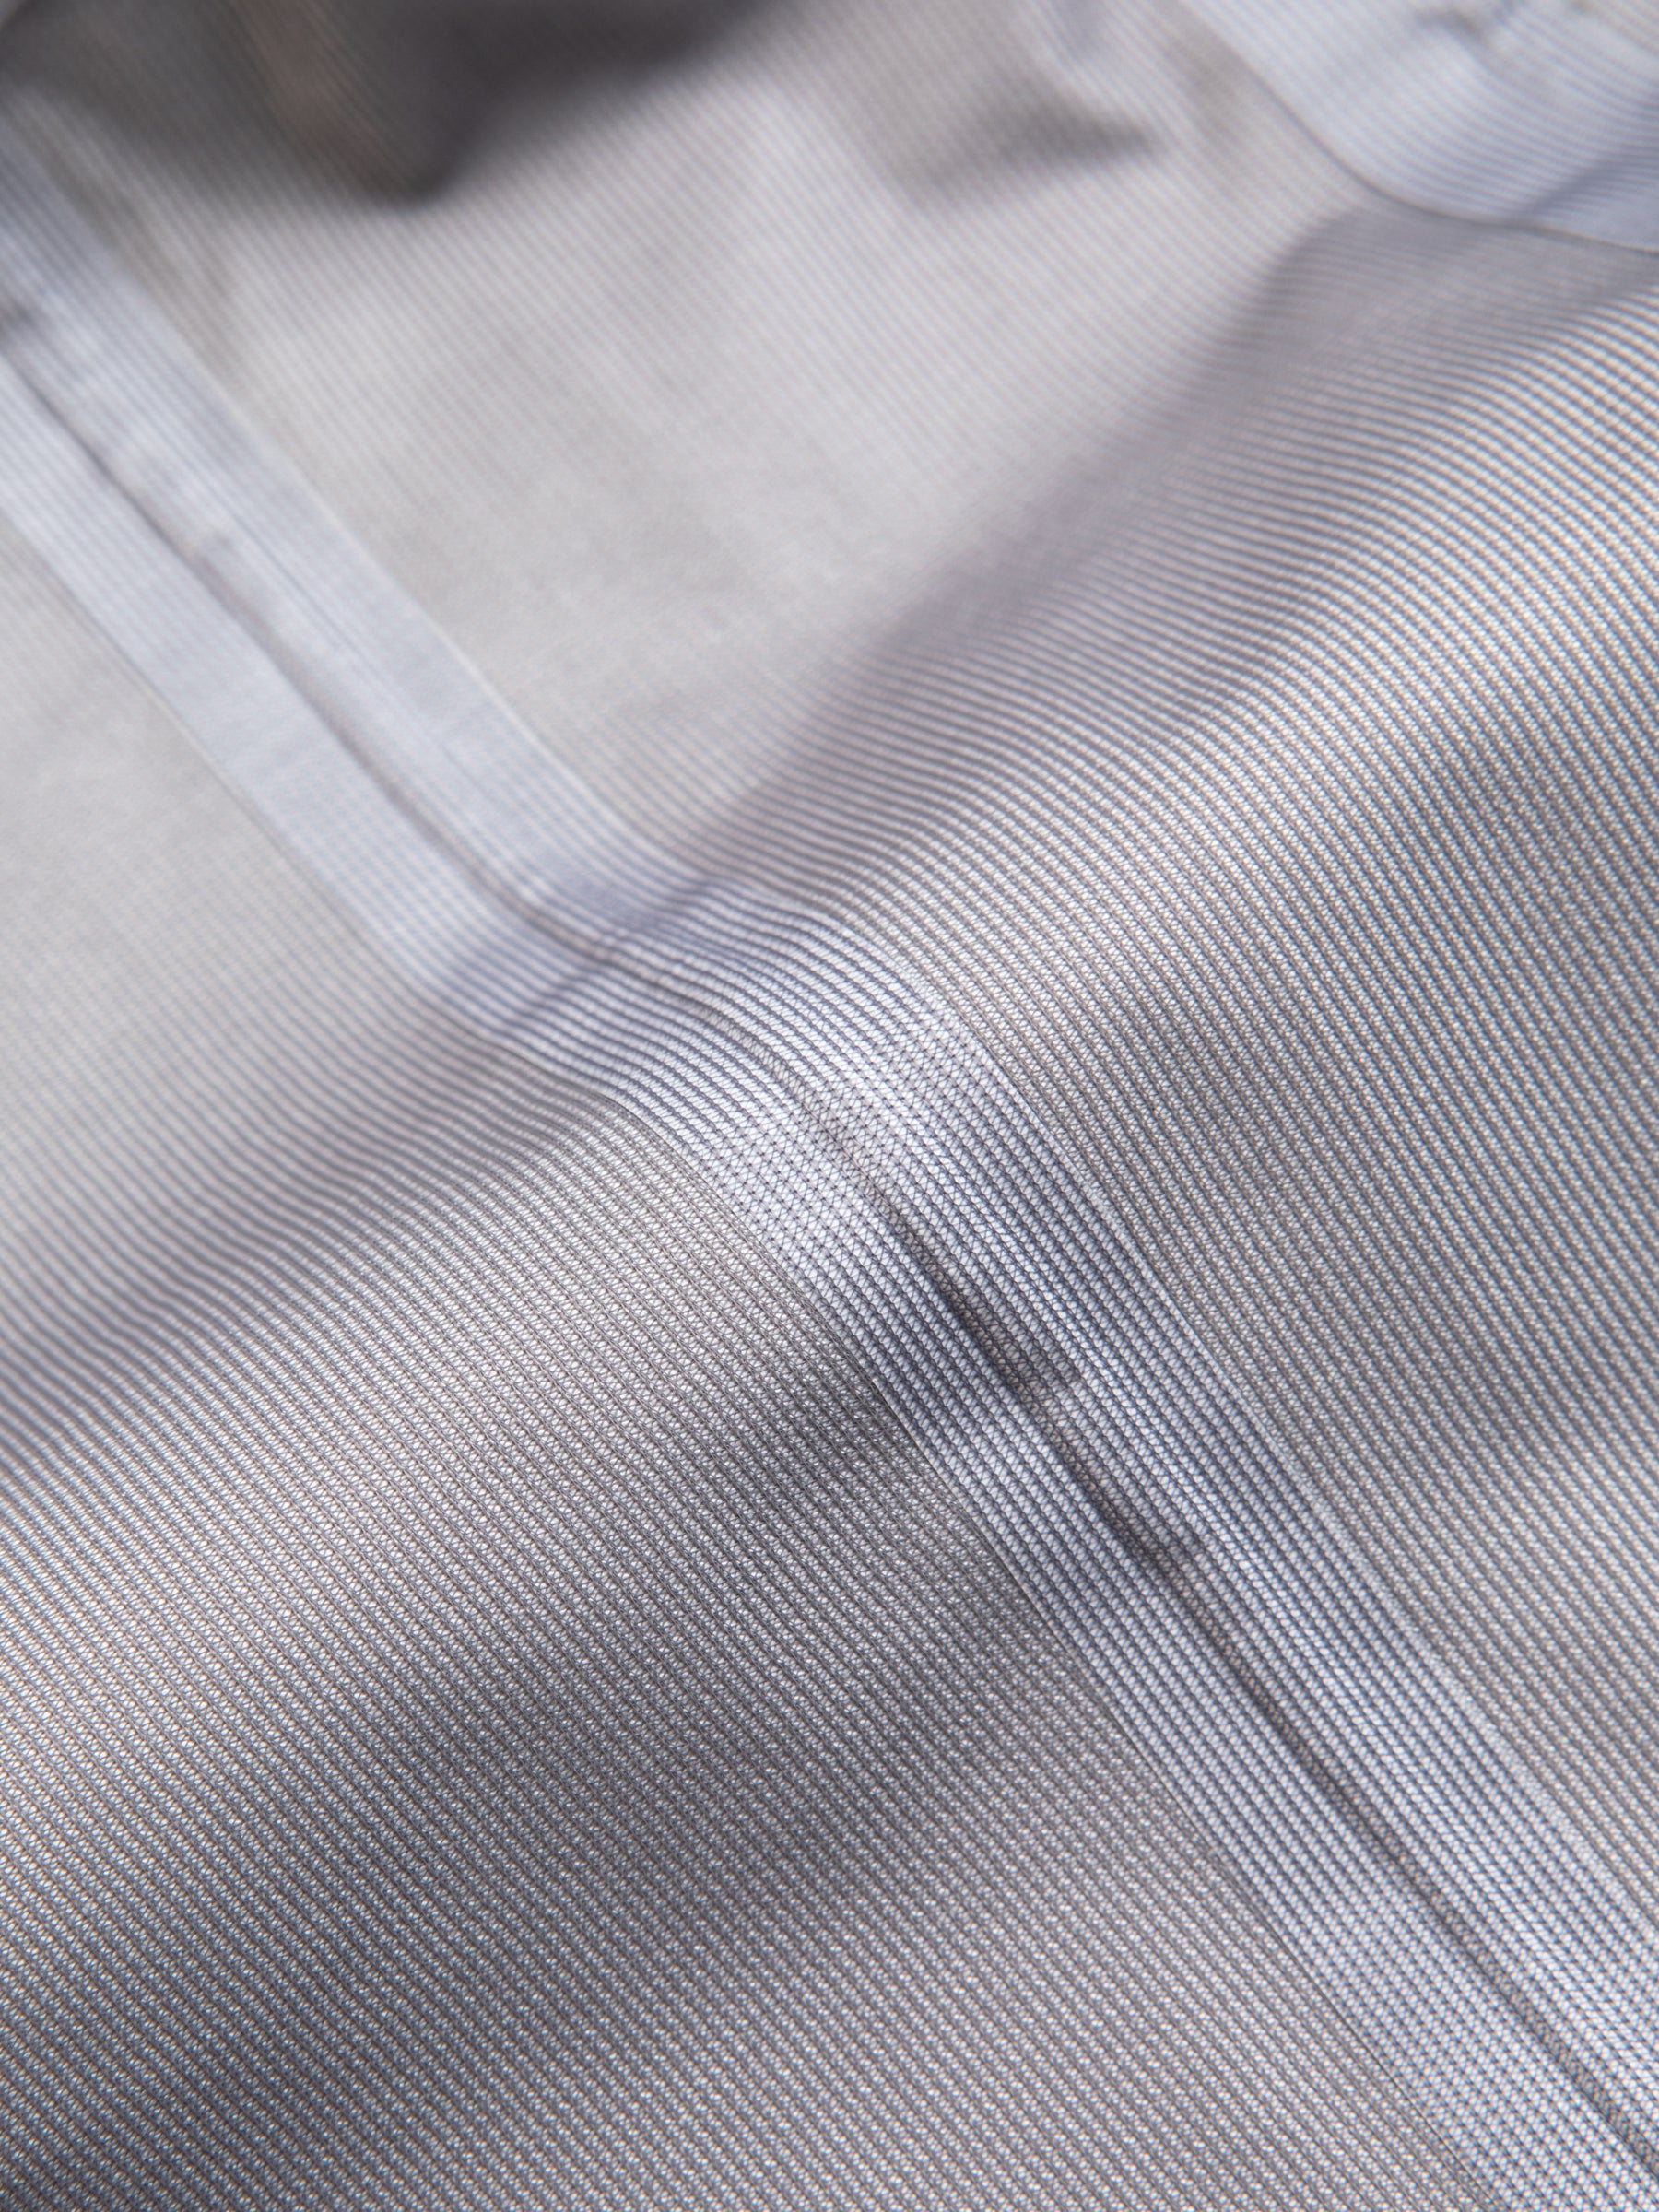 The inside fabric of a technical waterproof jacket with a fully taped seam.